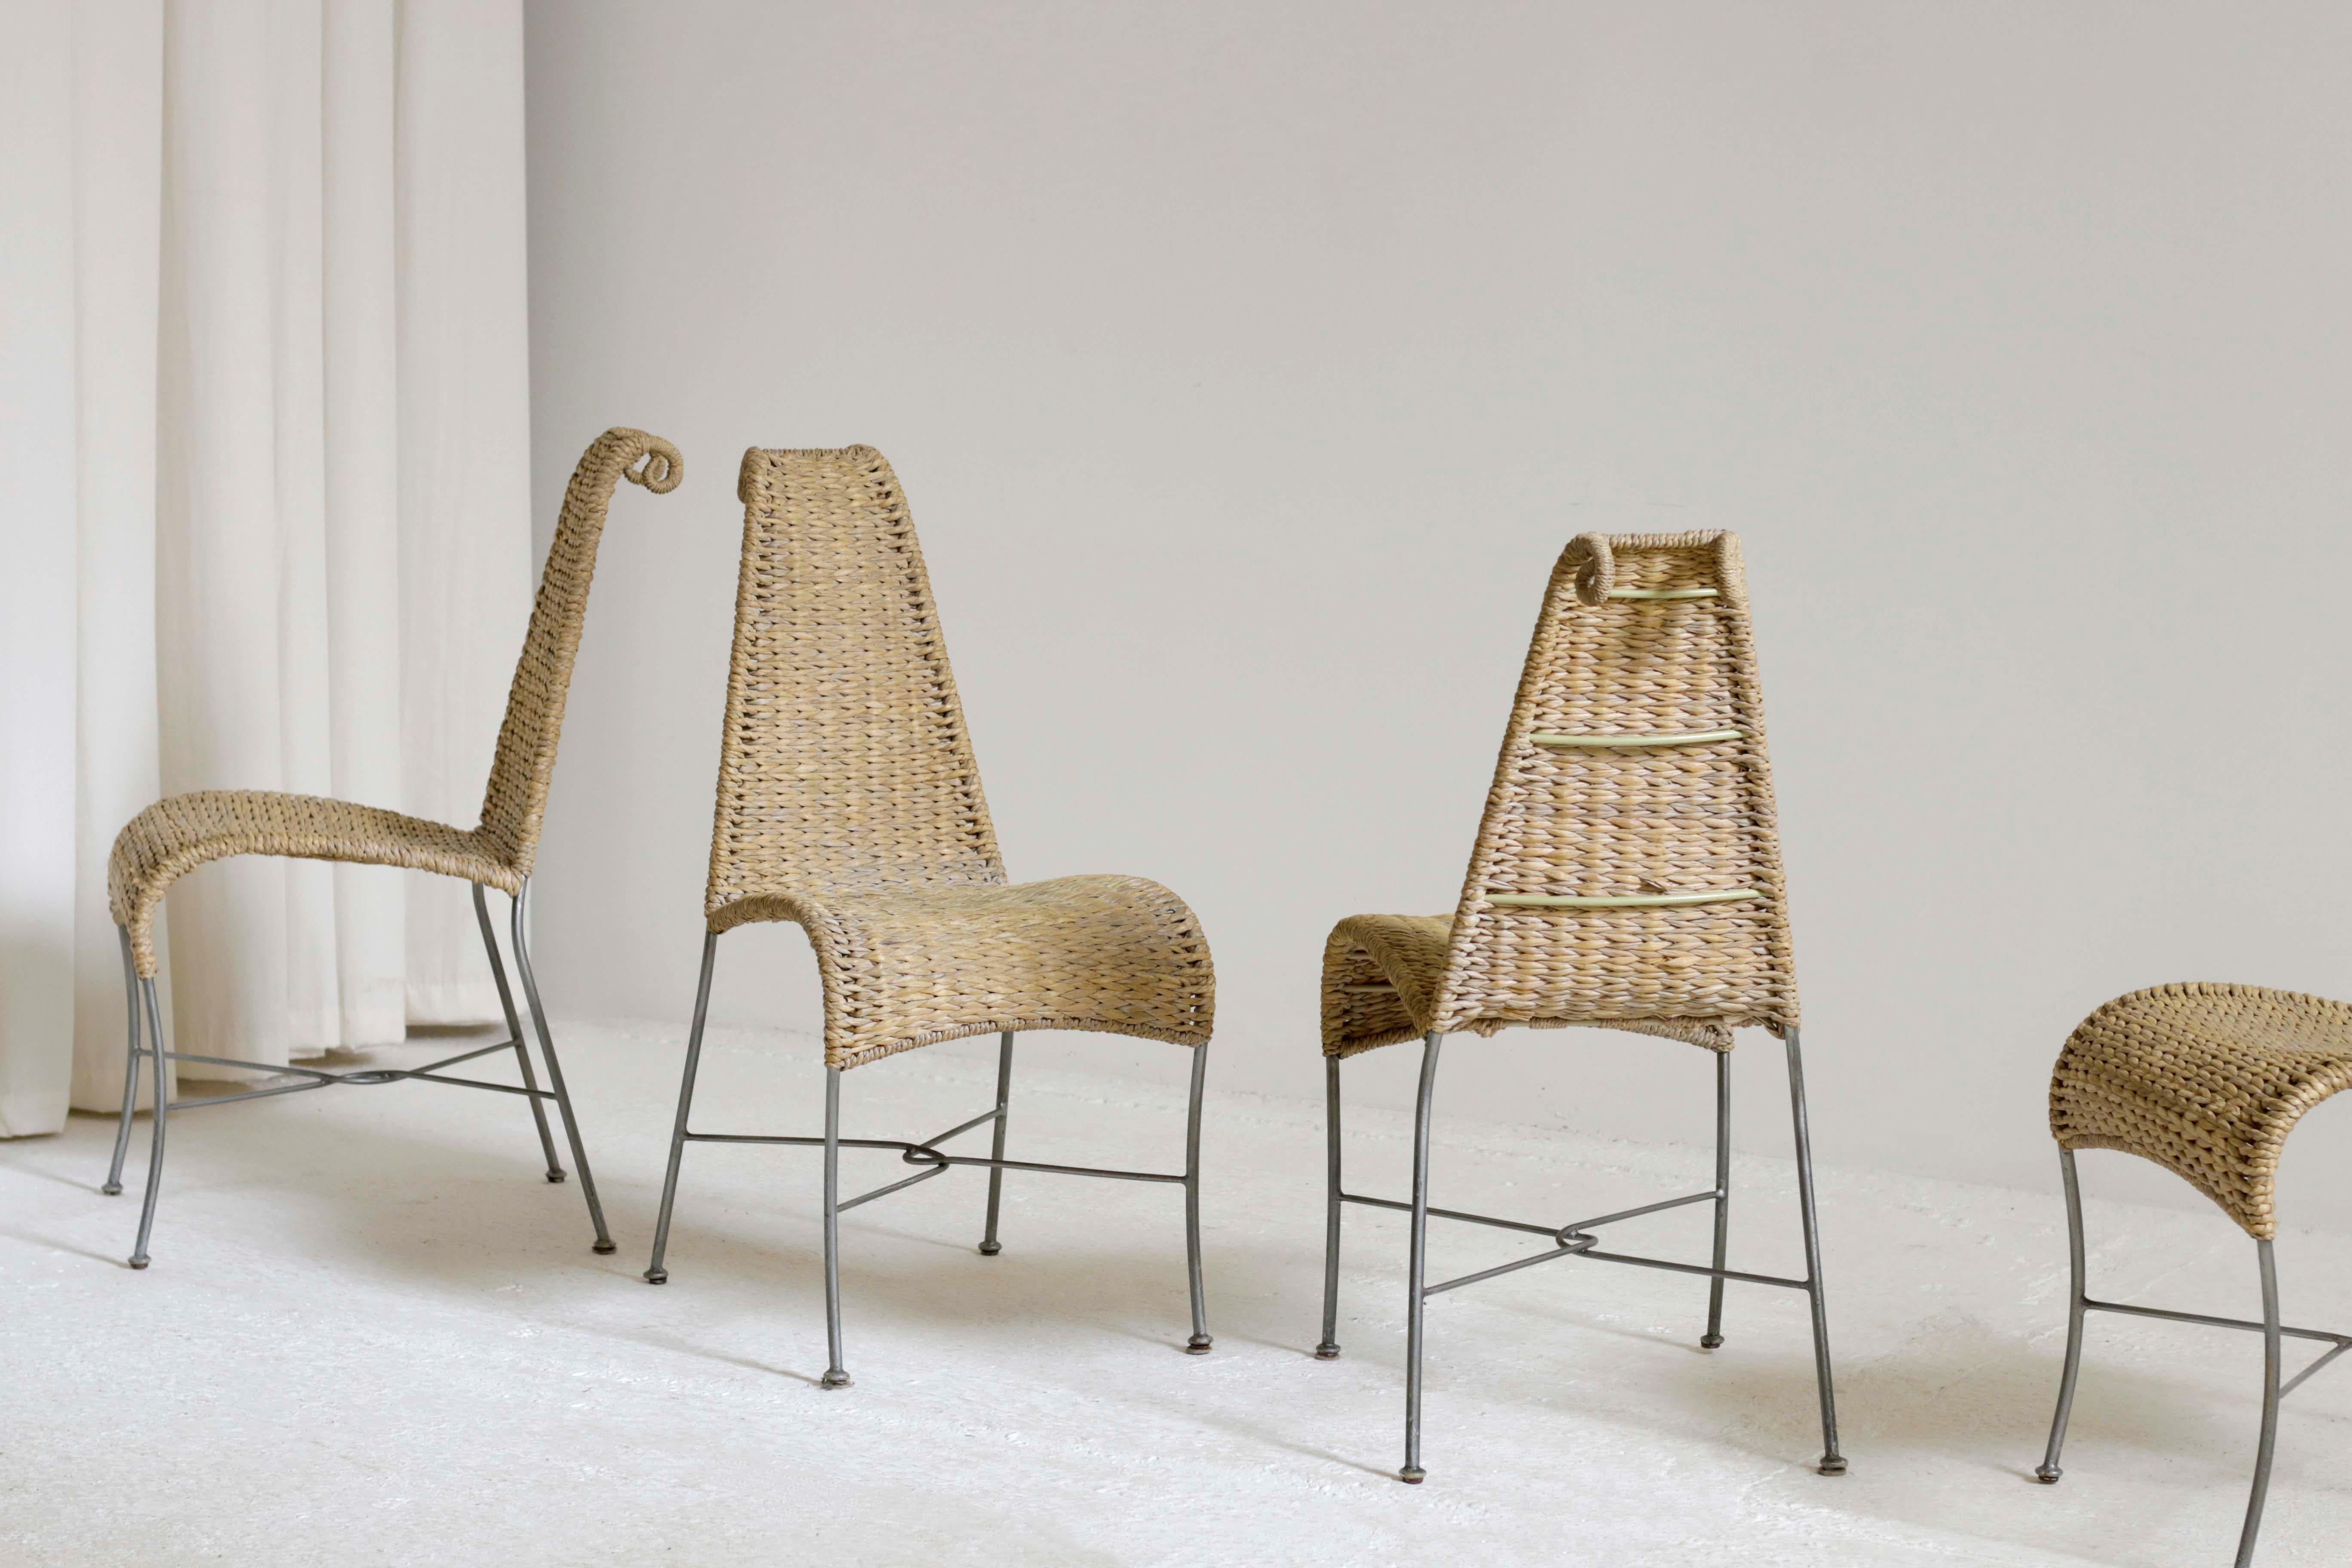 Set of 4 woven seagrass chairs with rams horn details. Lovely shape and good solid condition for age. Purchased from The Conran Shop circa 1990’s.

Dimensions: H87cm W40cm D50cm SH45cm.